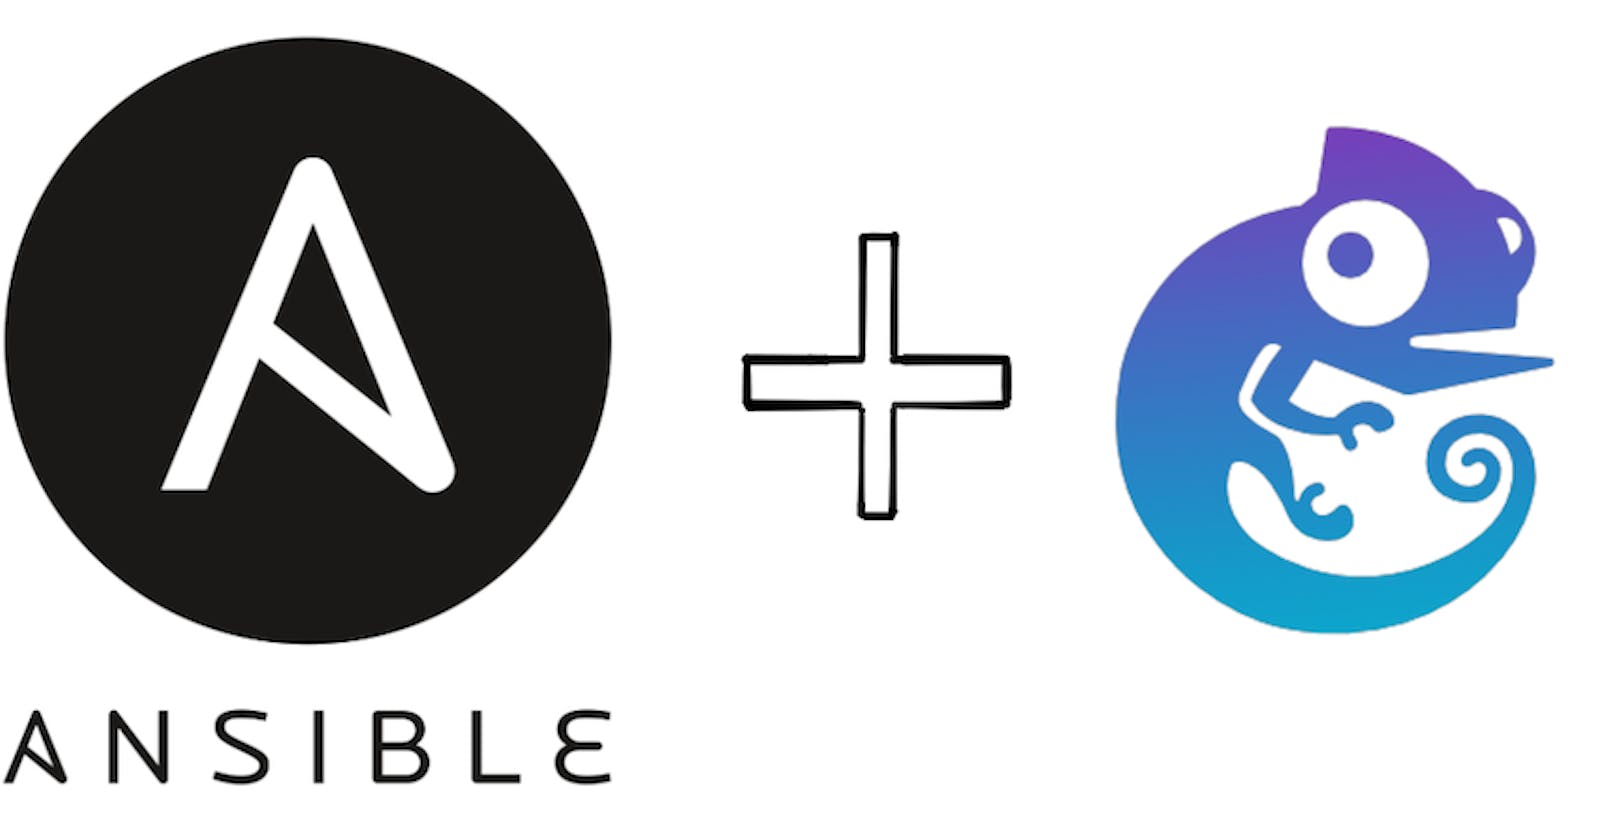 Automate your network labs with Ansible and GNS3 (Part 1)